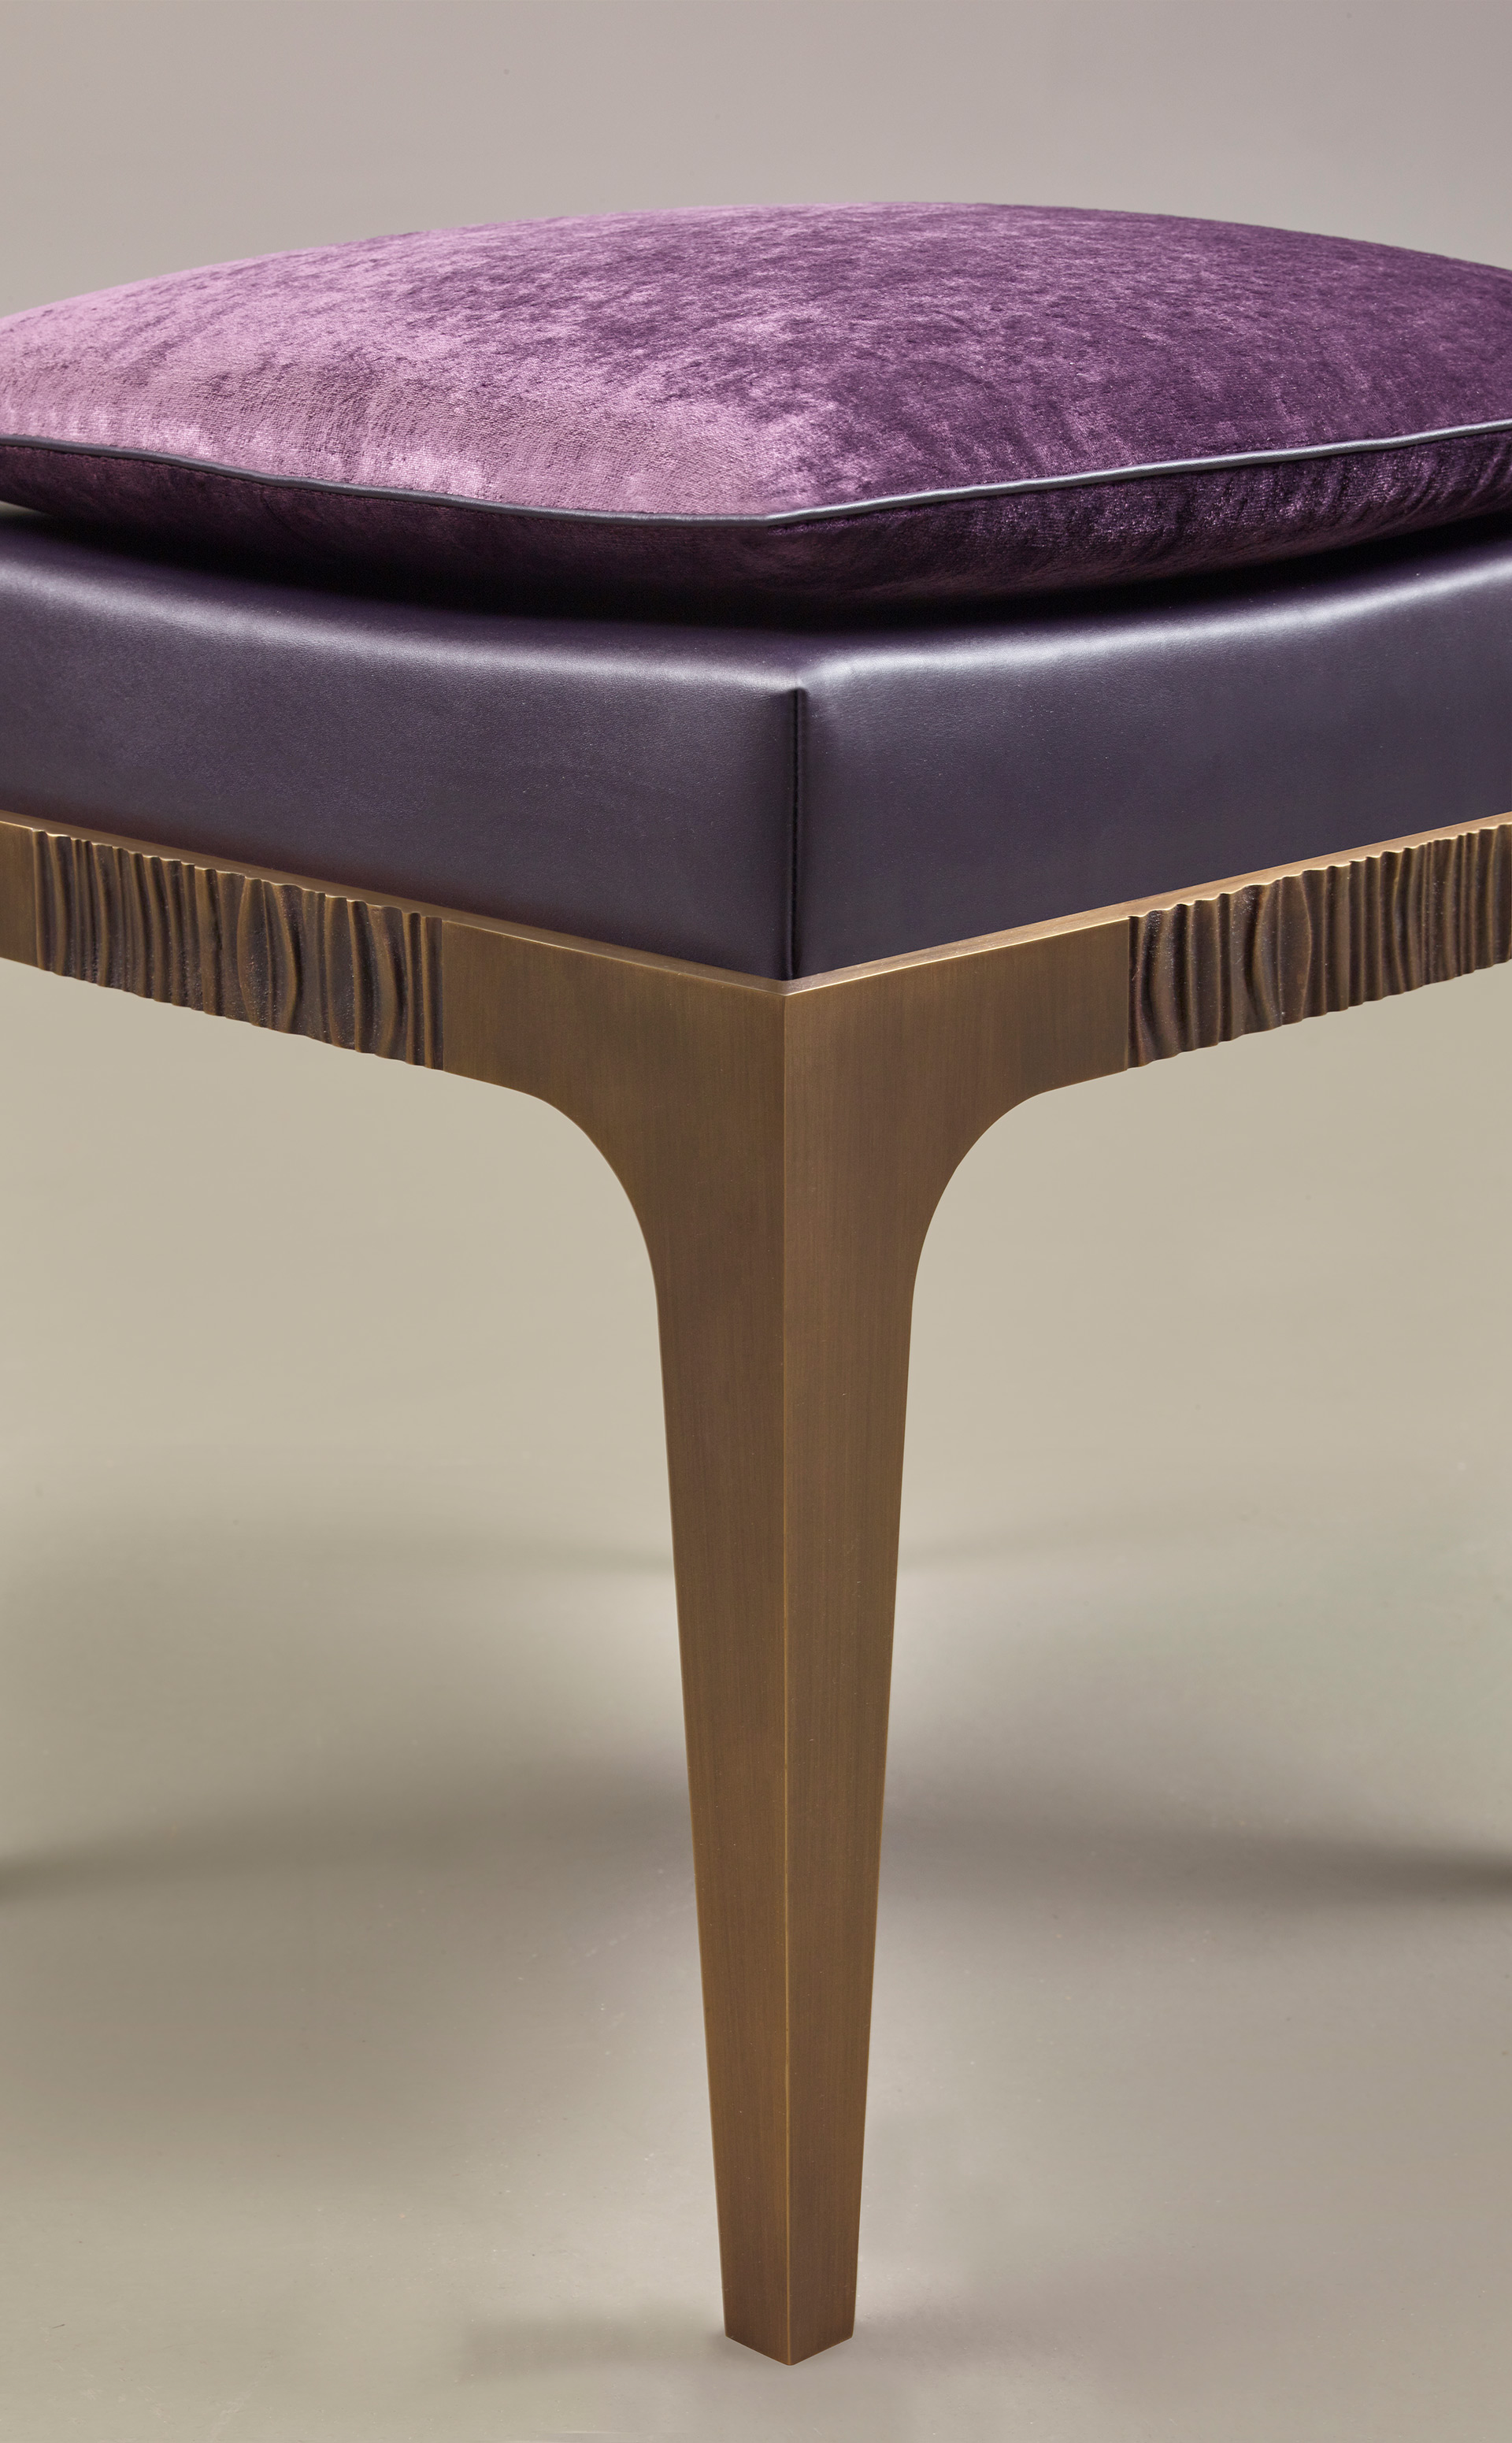 Detail of Montagu, a bronze stool with leather seat and fabric cushion, from Promemoria's The London Collection | Promemoria